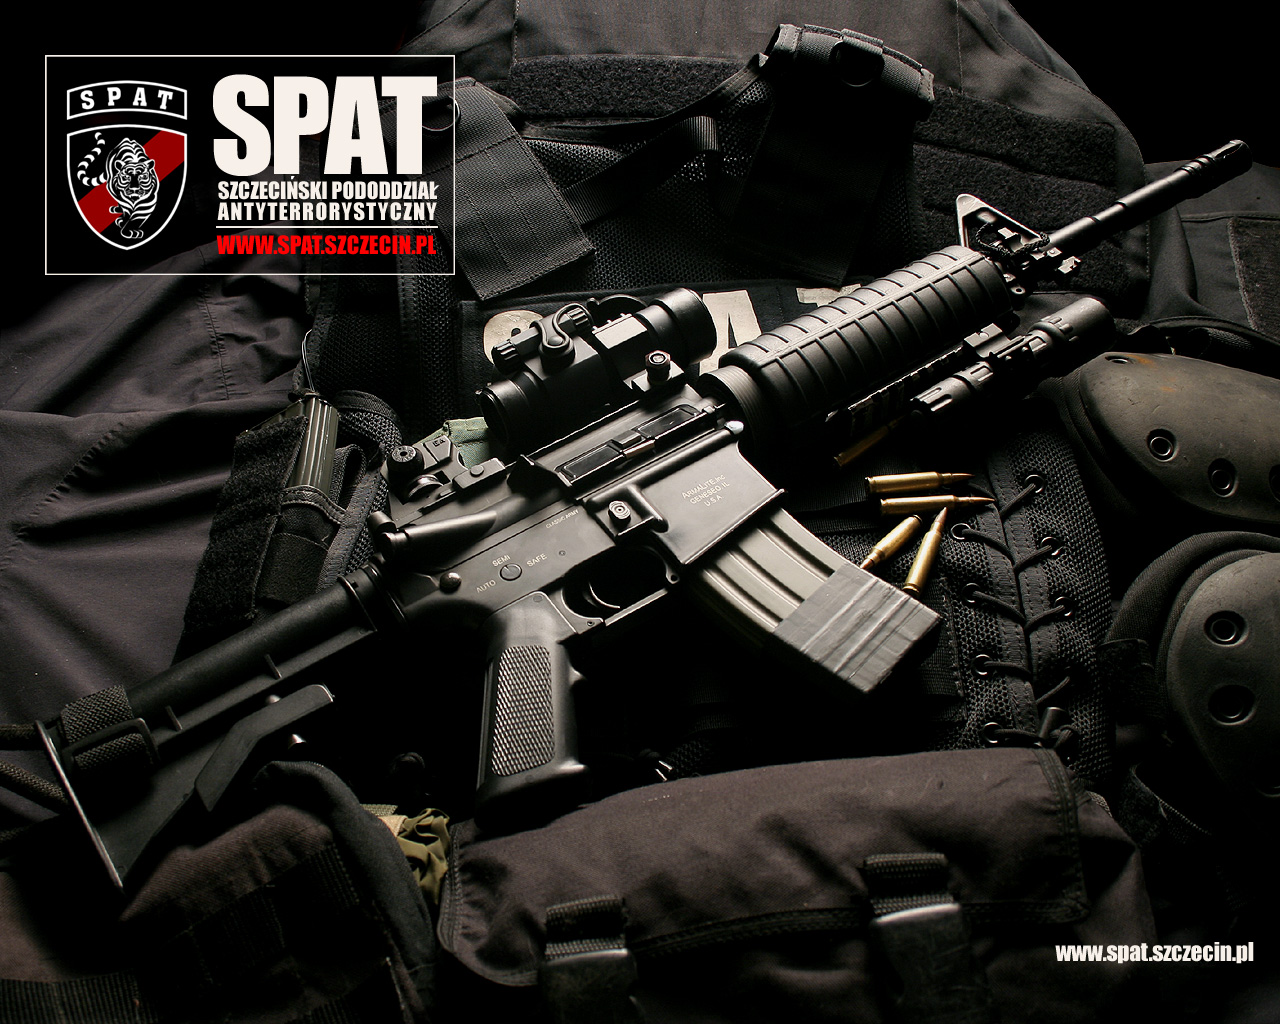 Automatic Rifle Wallpaper Weapons Spat Swat